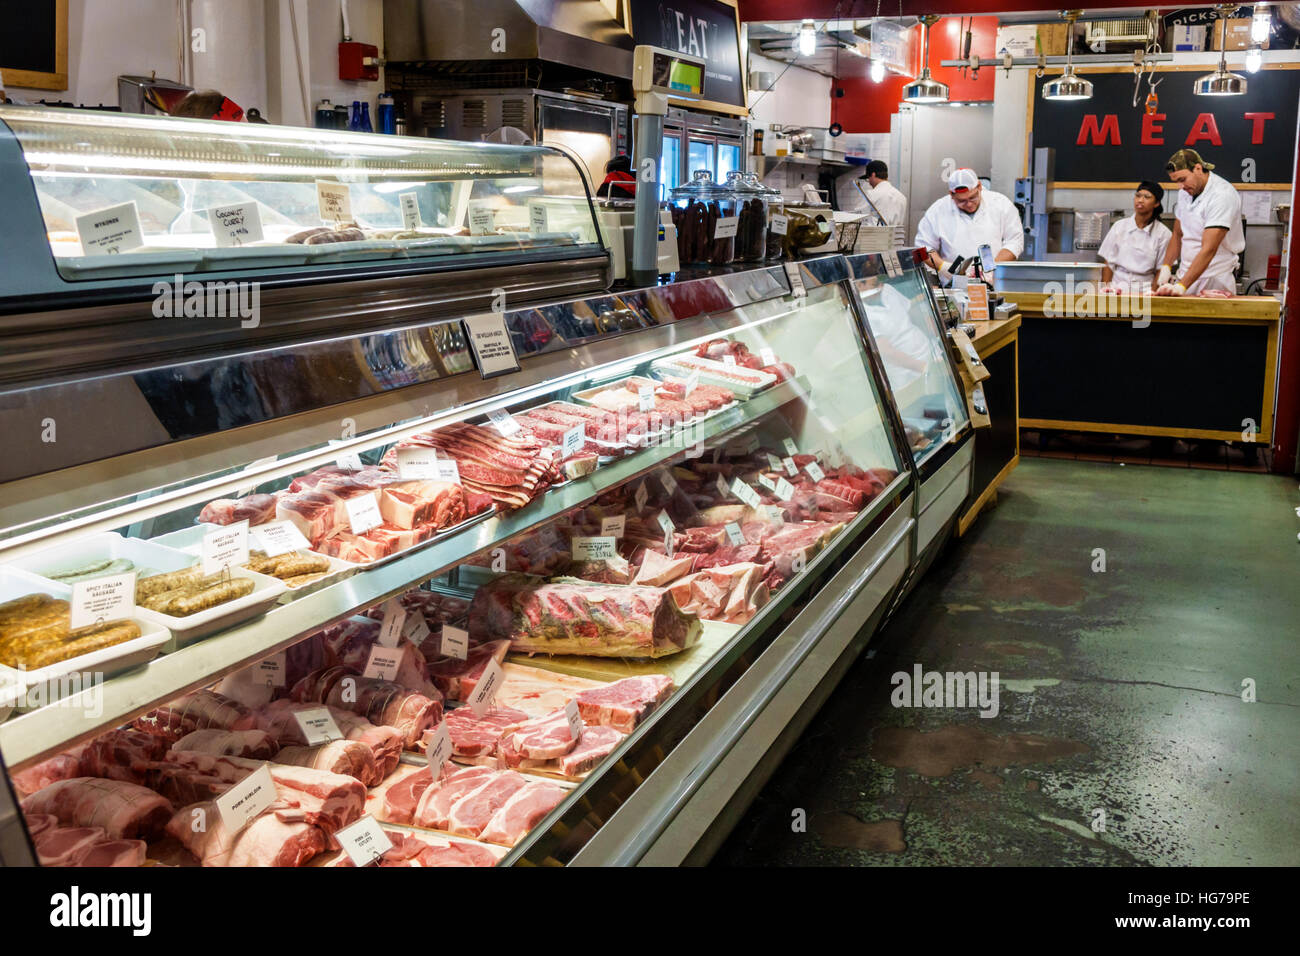 New York City,NY NYC Manhattan,Chelsea,Chelsea Market,Dickson's Farmstand Meats,butcher,refrigerated case,steaks,counter,display sale NY160723080 Stock Photo